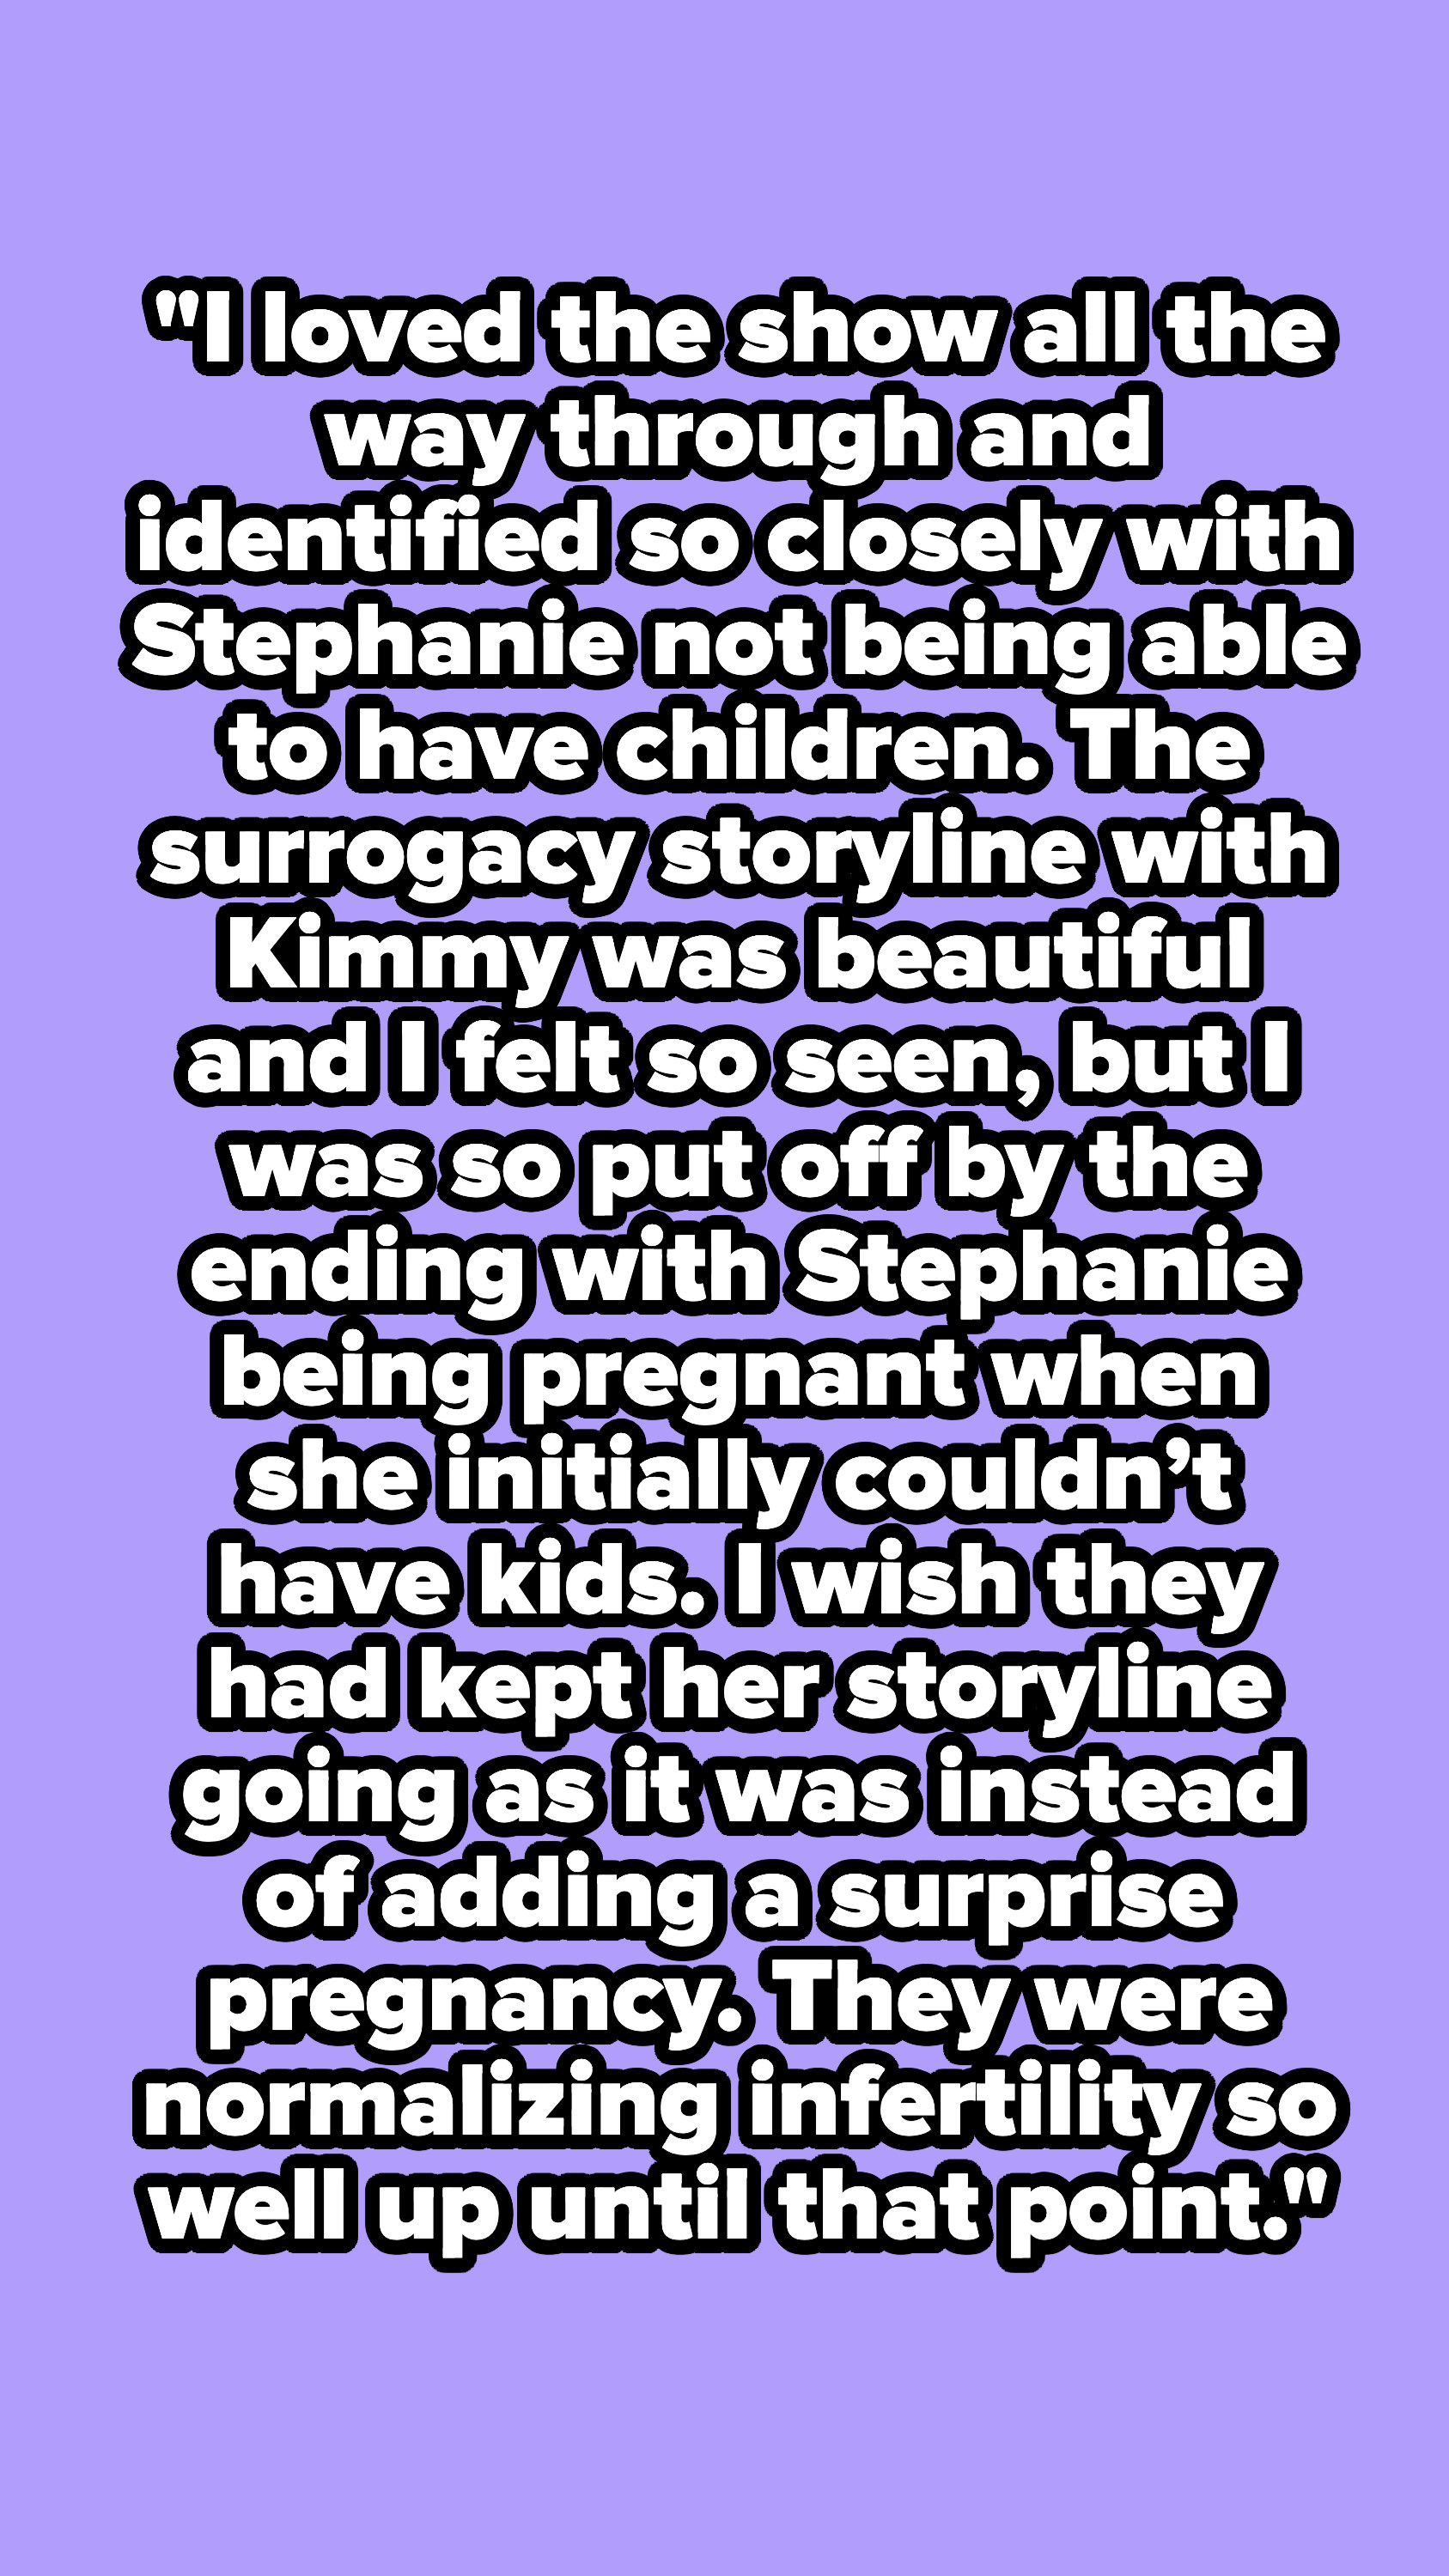 &quot;I wish they had kept Stephanie&#x27;s storyline going as it was instead of adding a surprise pregnancy.&quot;